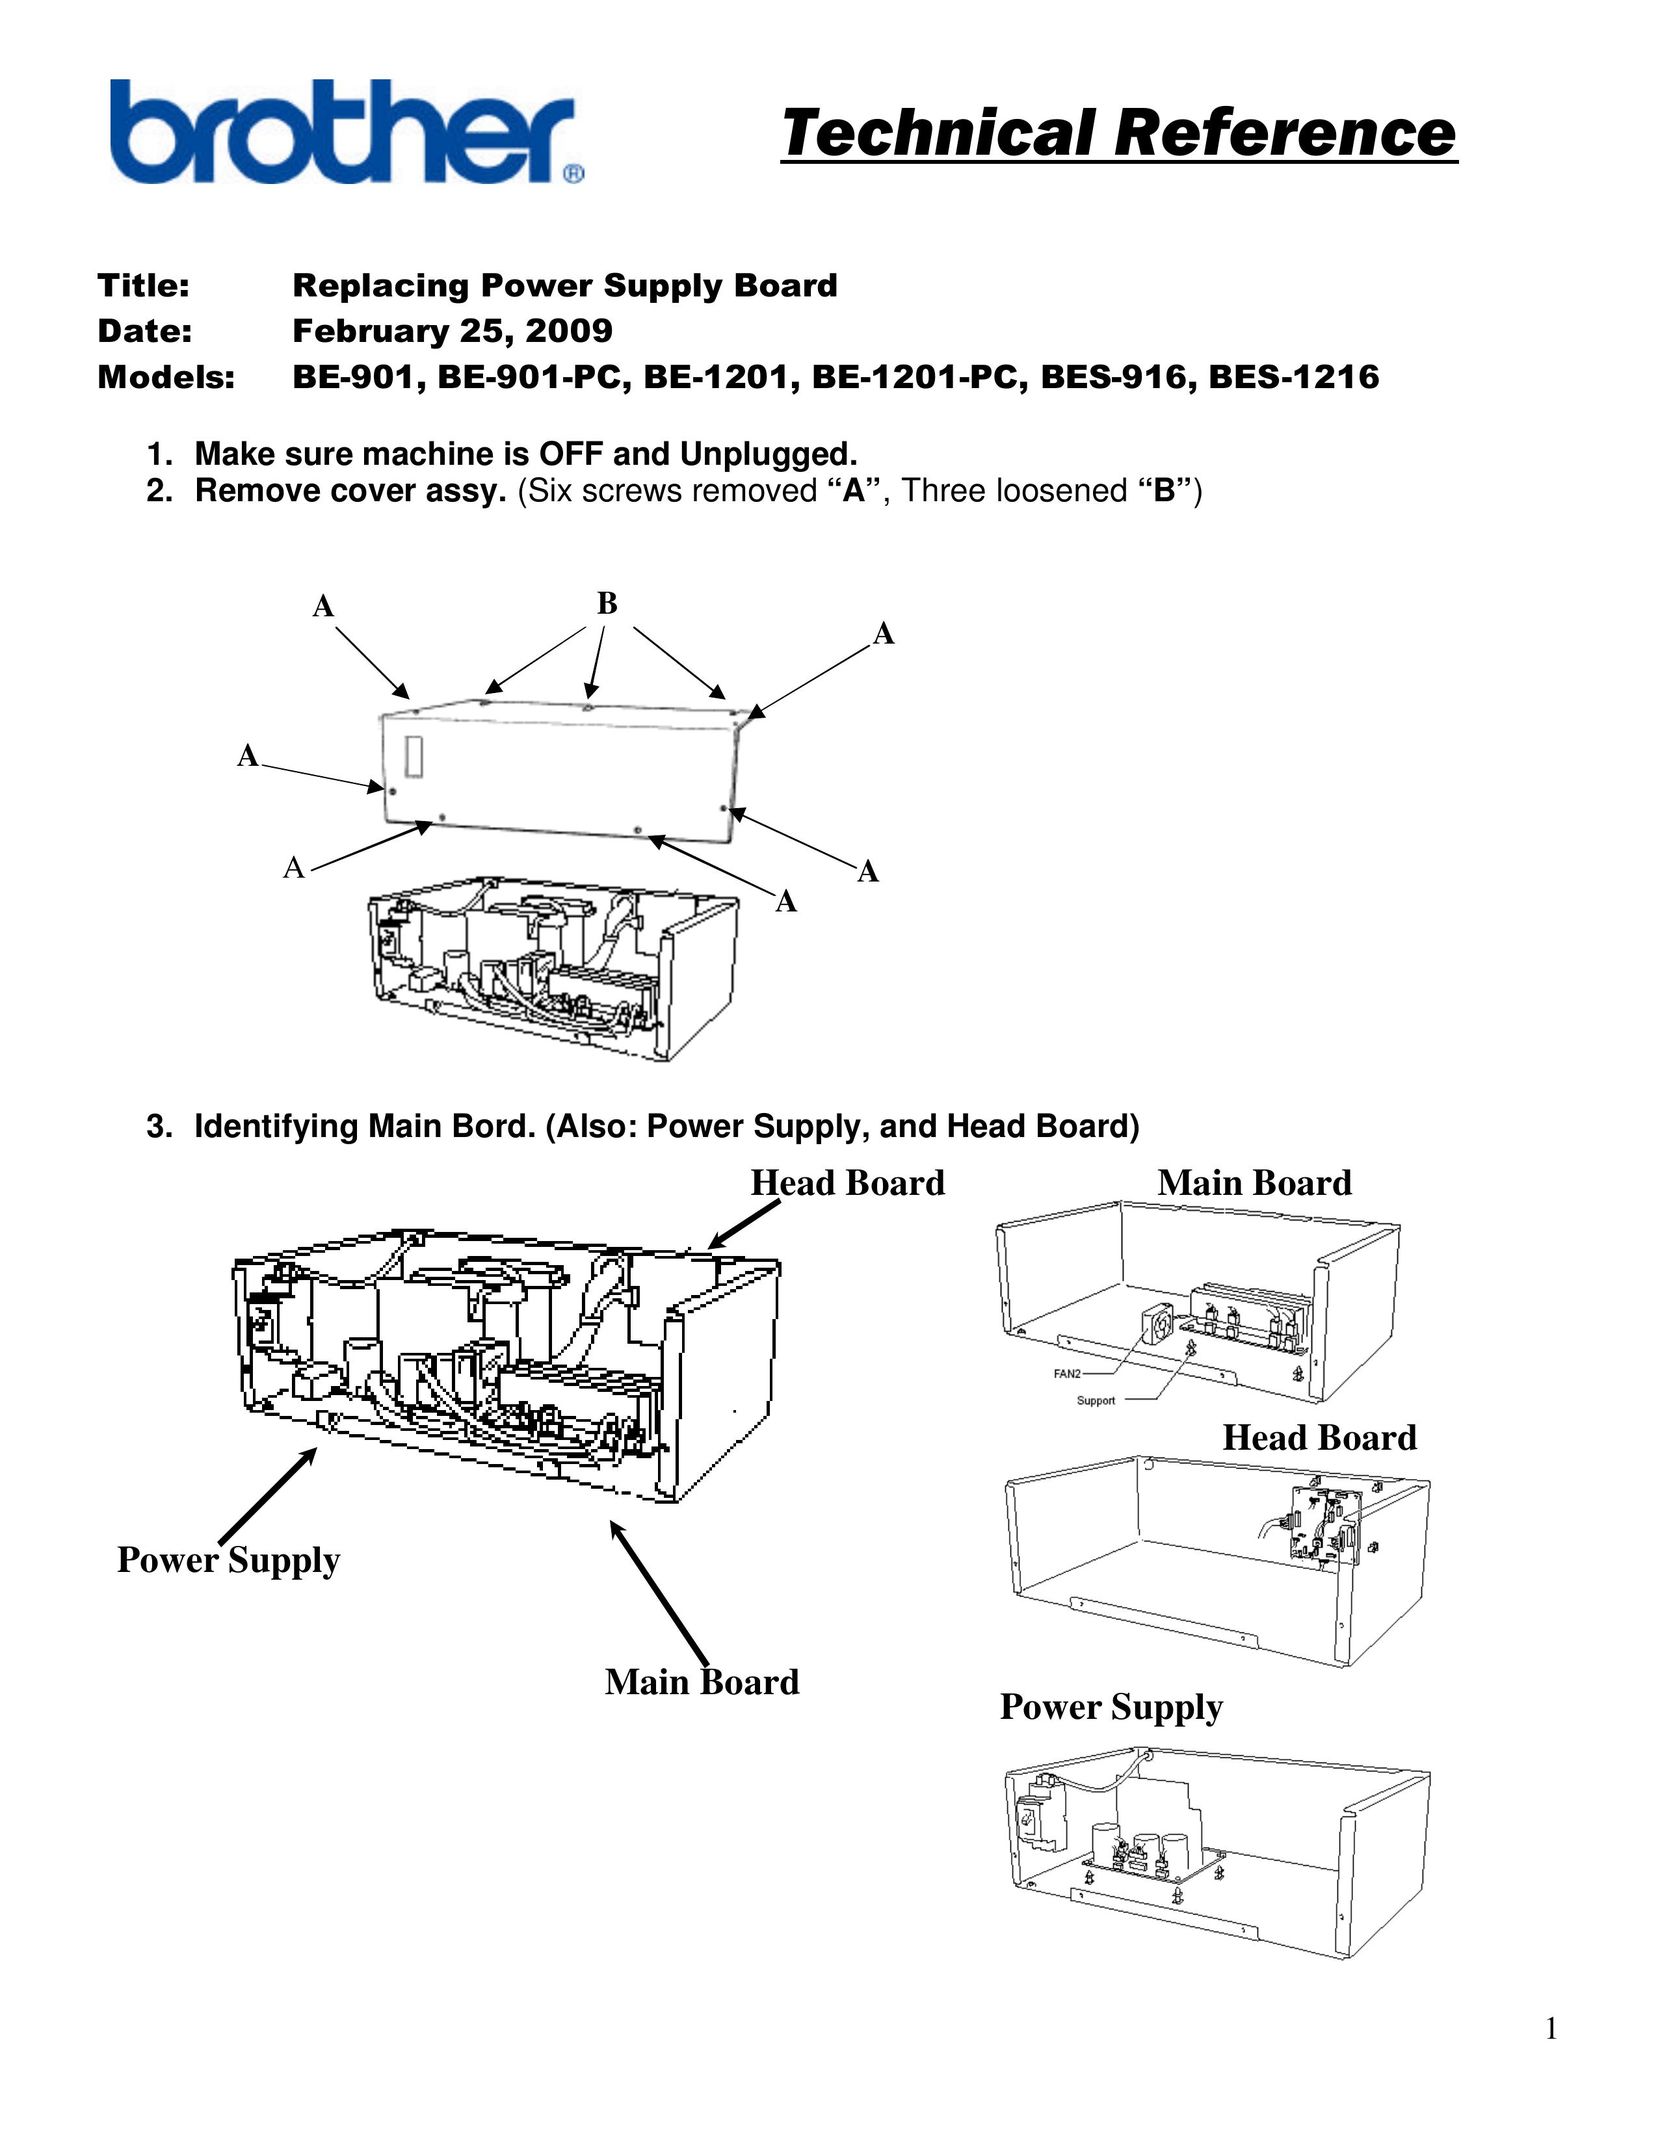 Brother BES-916 Power Supply User Manual